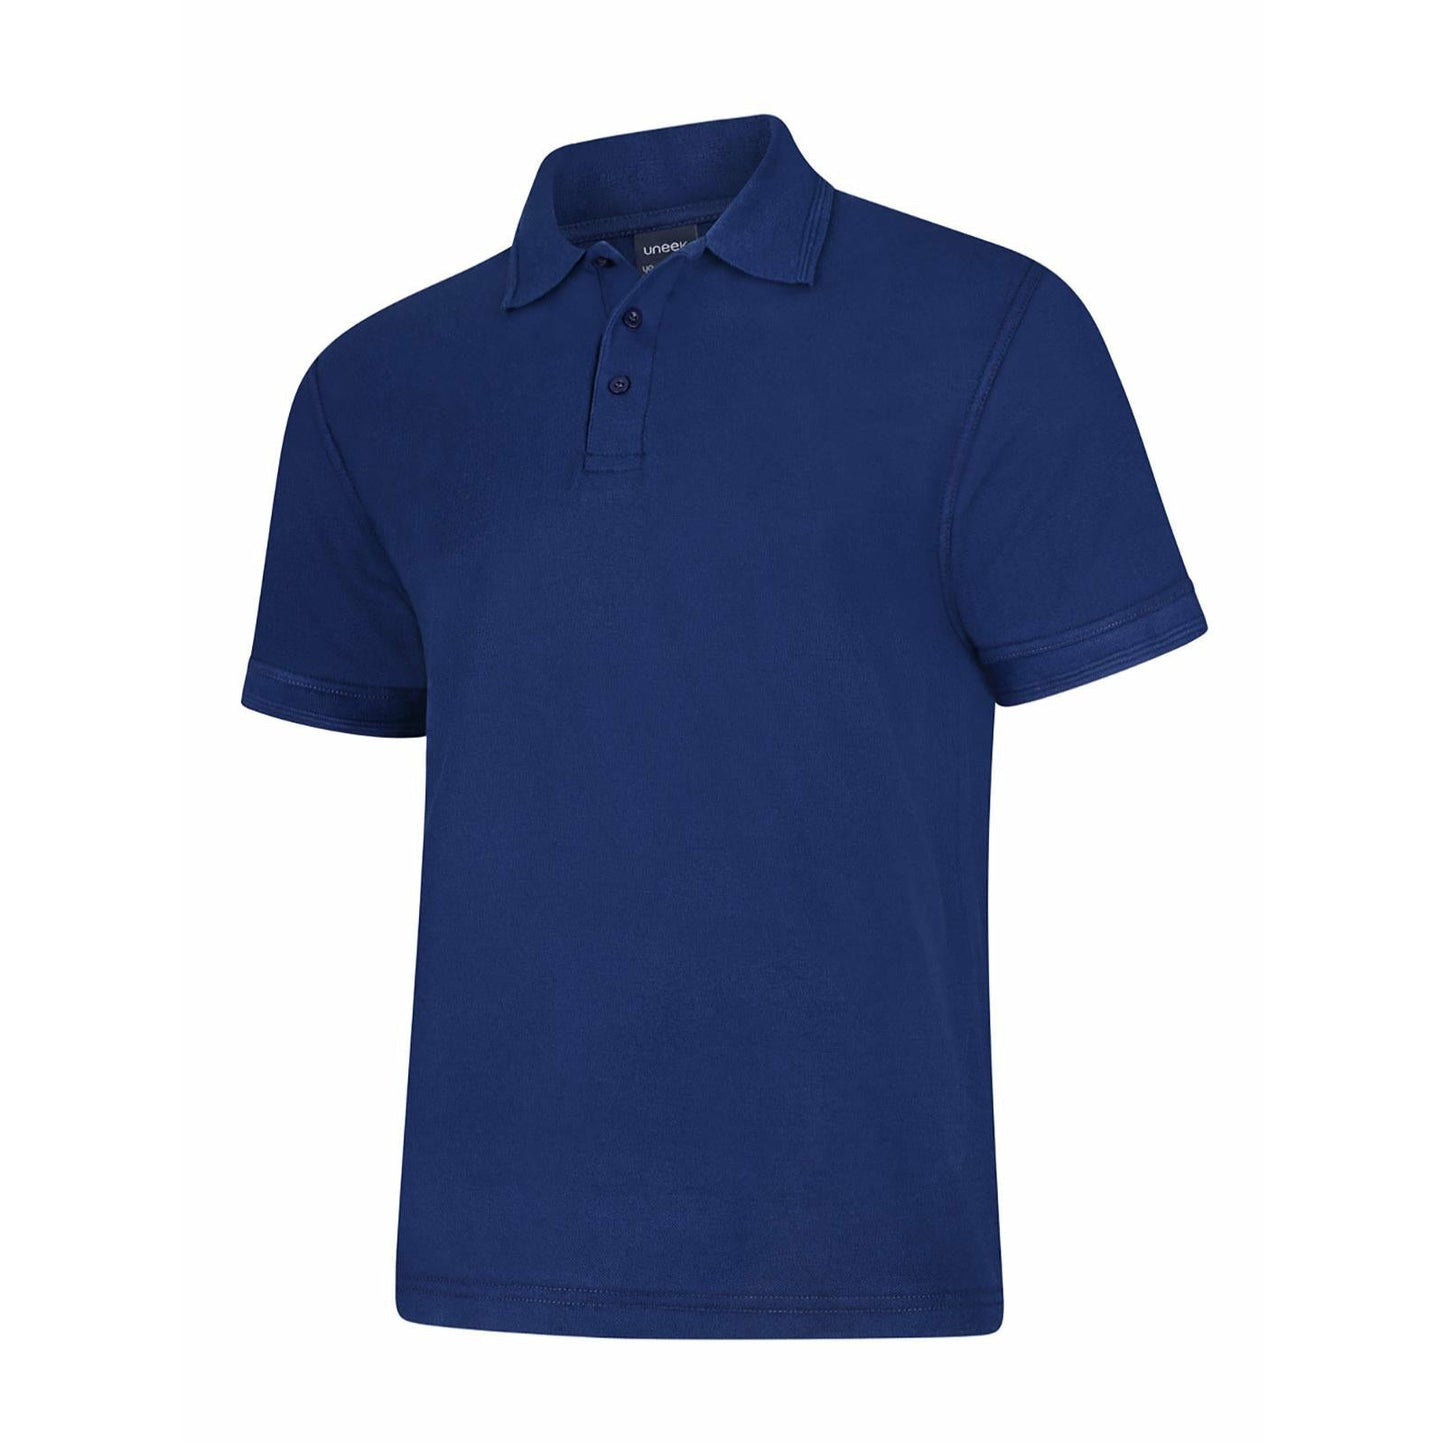 Deluxe Polo Shirt (2XL - 4XL) - French Navy